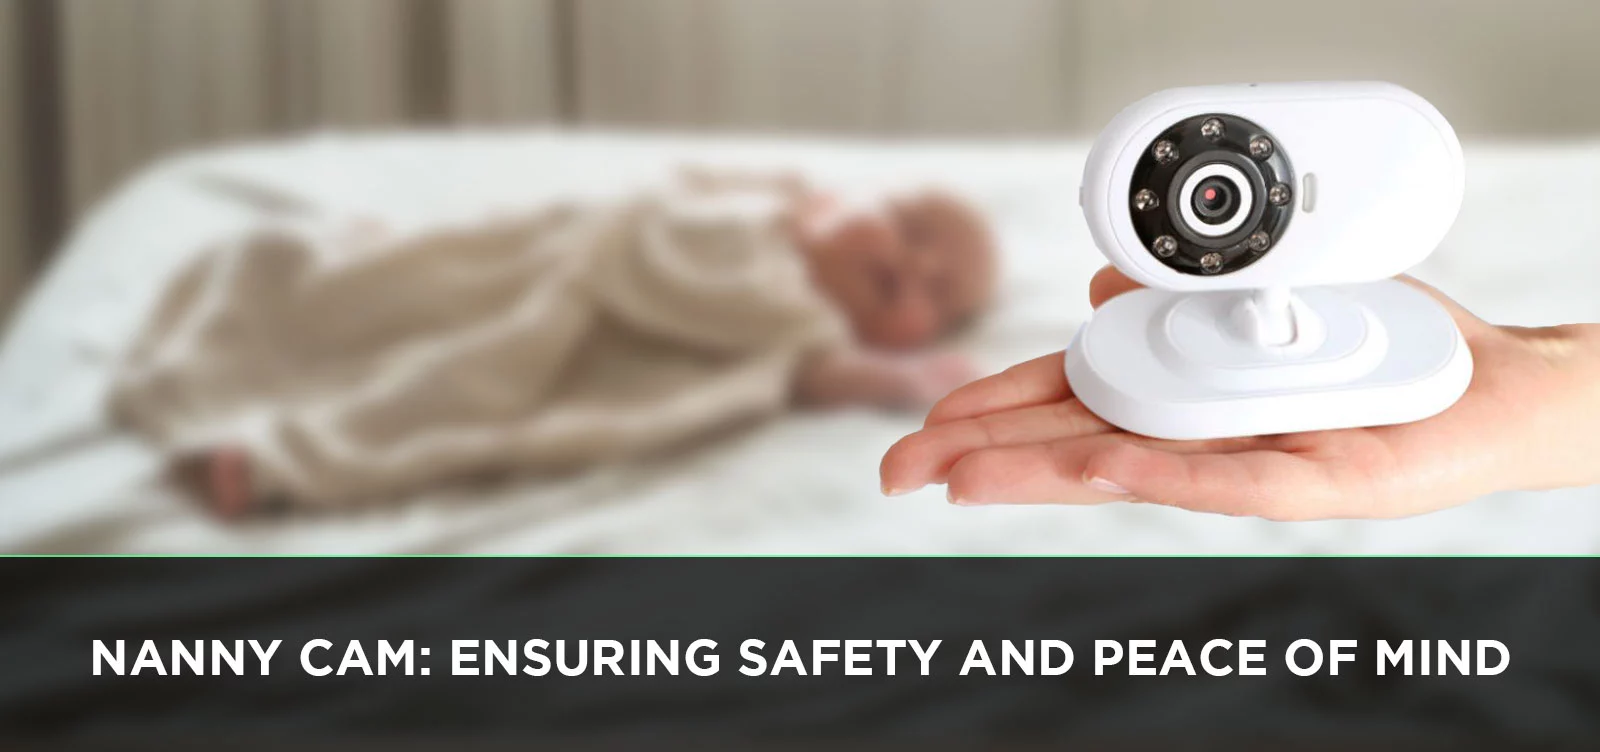 Nanny Cam: Ensuring Safety and Peace of Mind